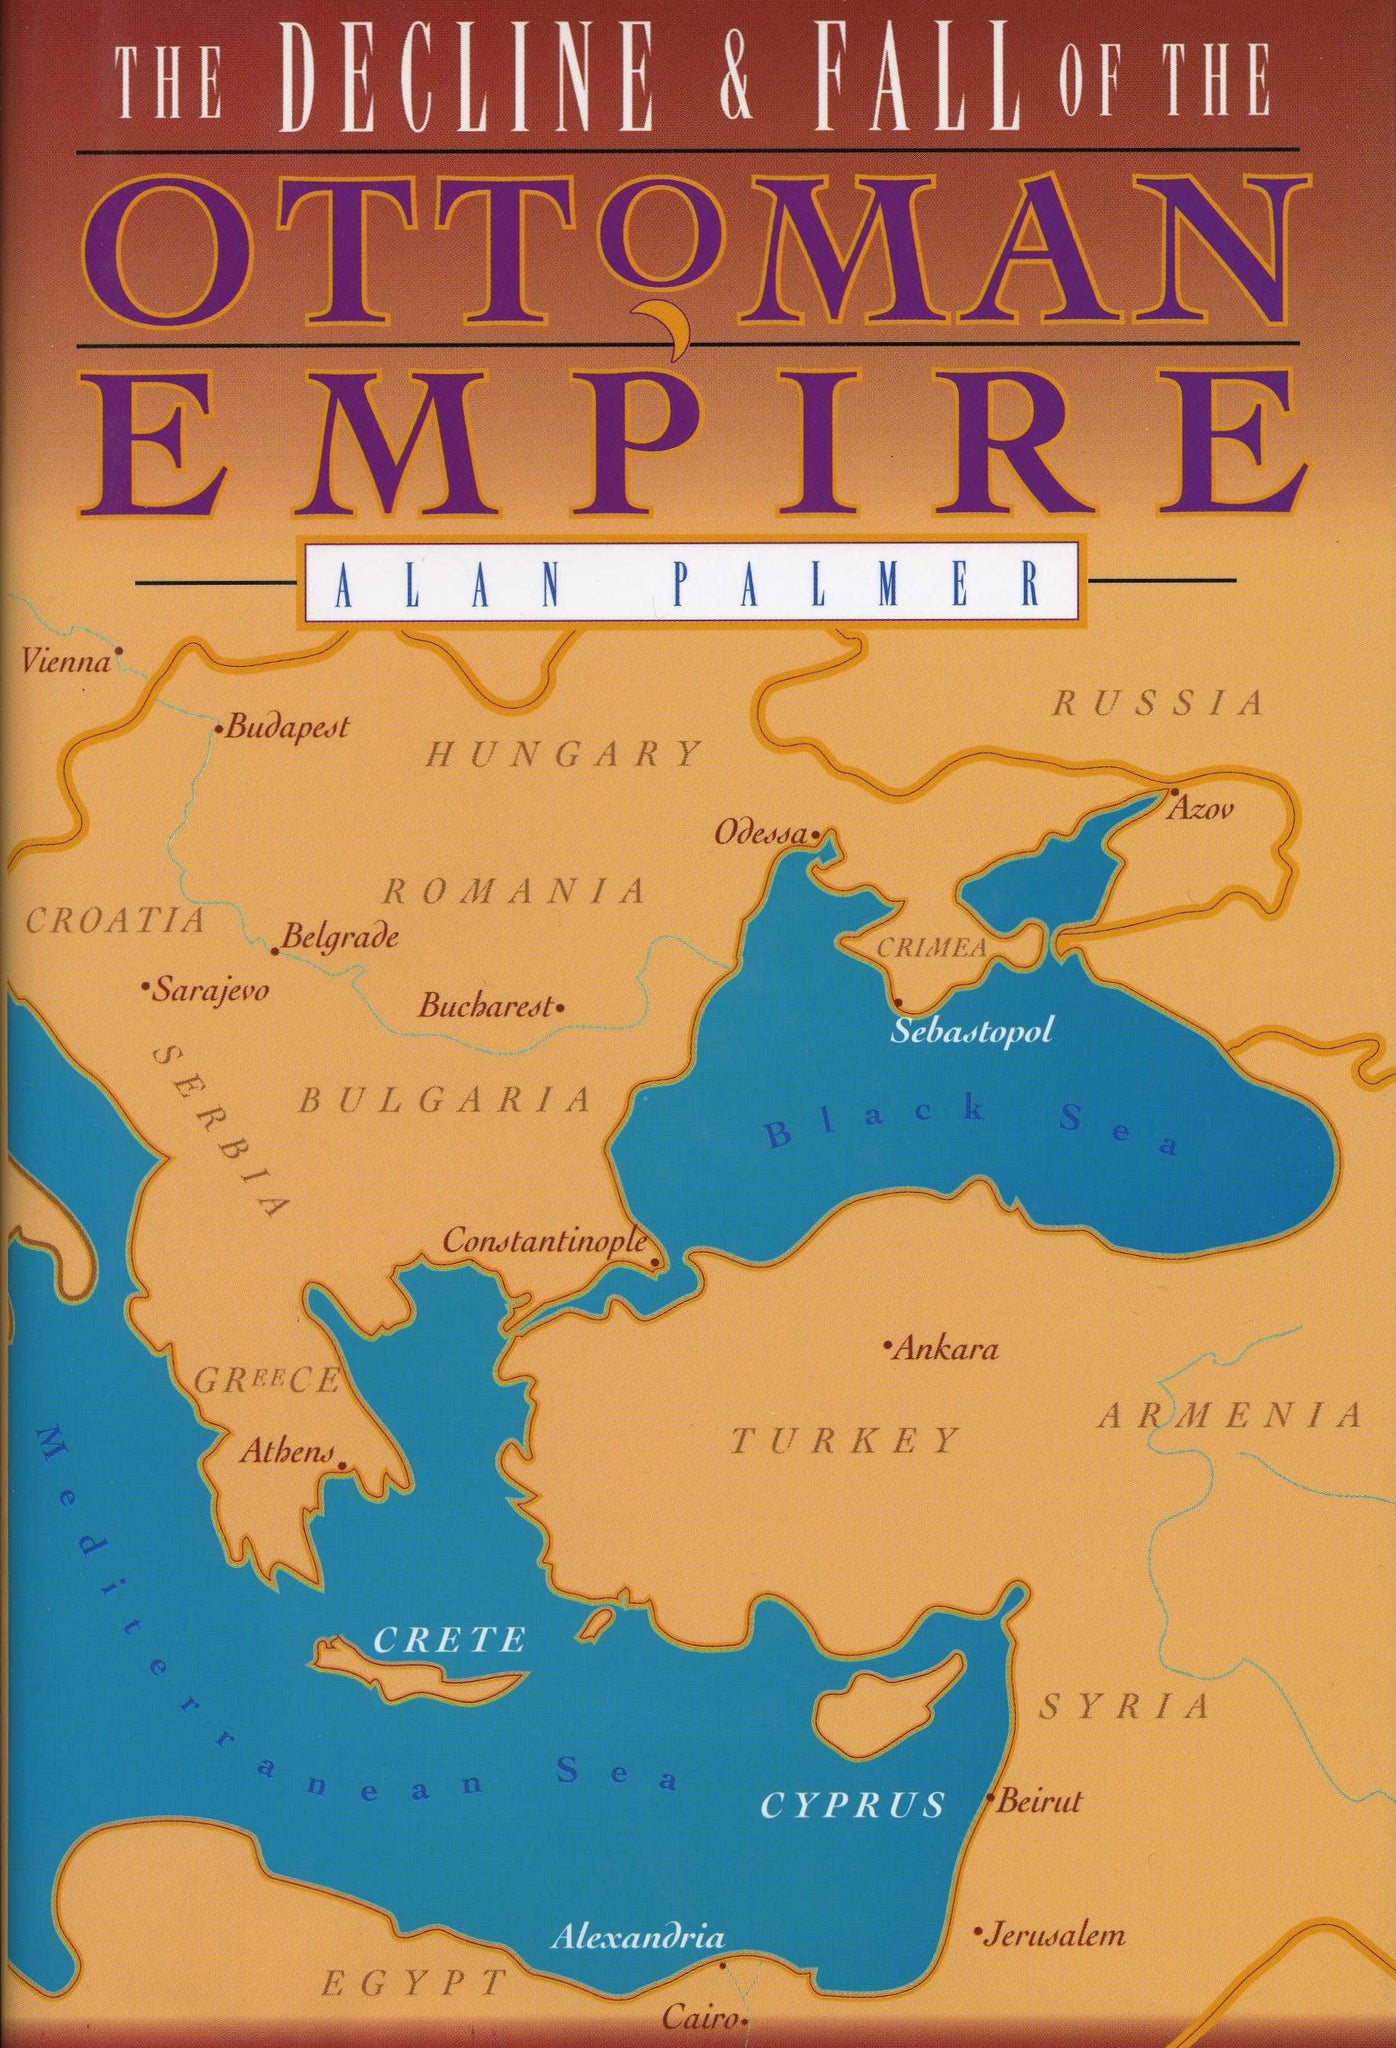 DECLINE AND FALL OF THE OTTOMAN EMPIRE